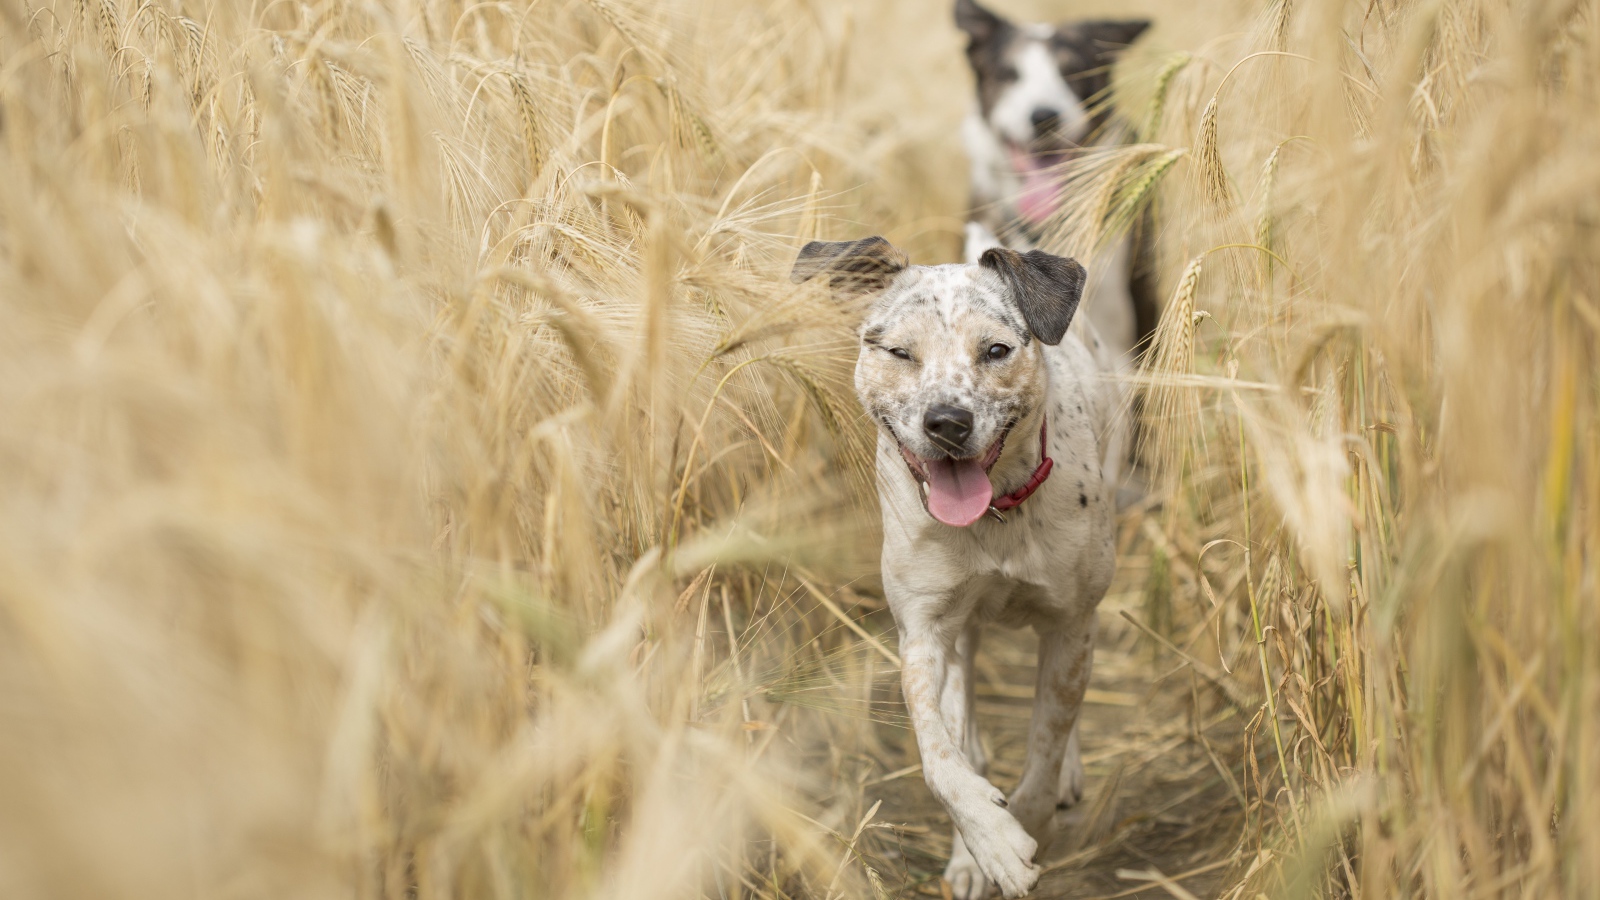 Two dogs with tongue sticking out running through a field of wheat